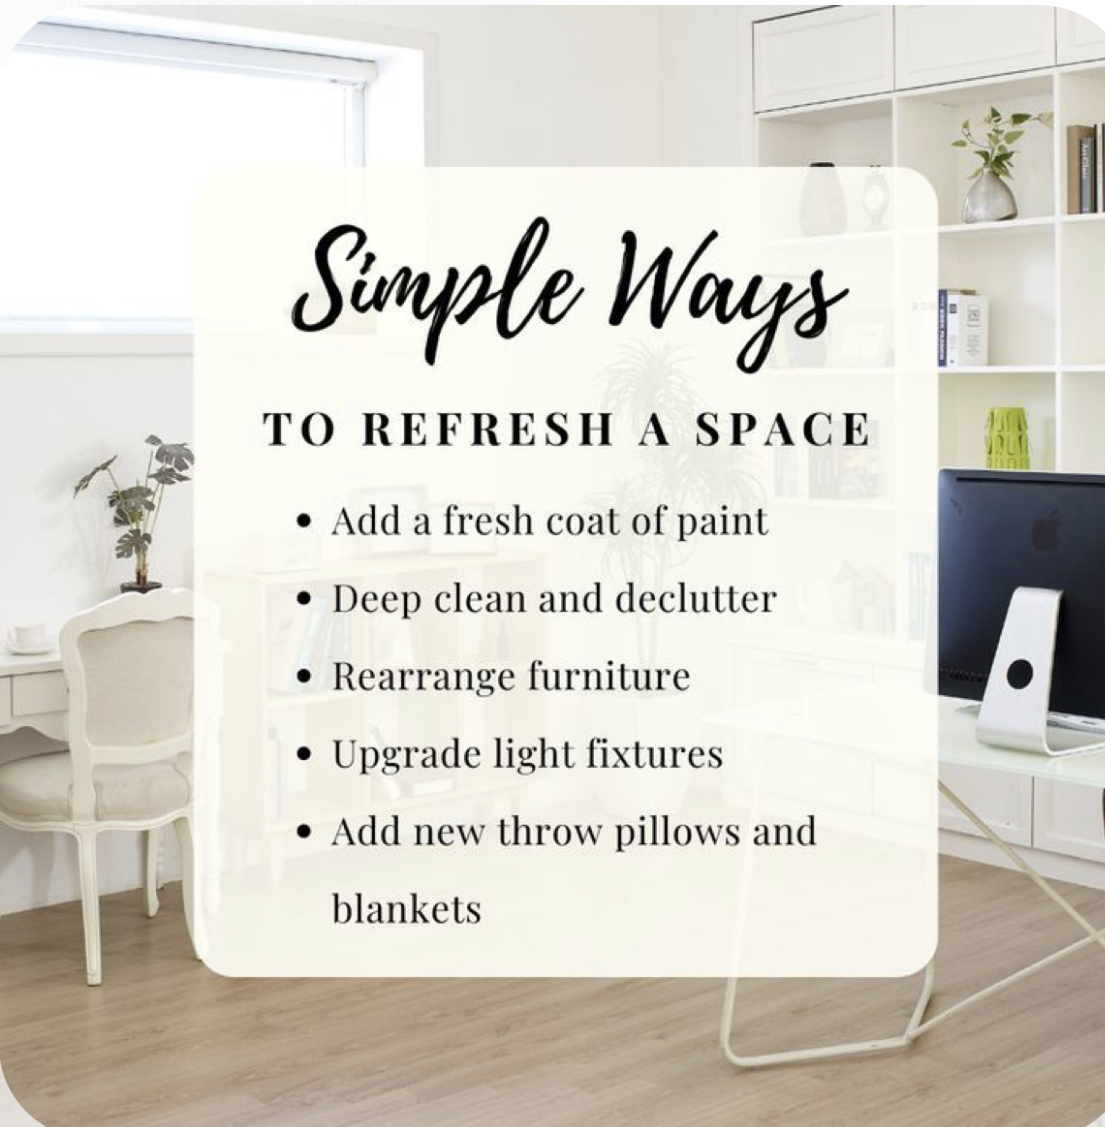 5 Simple Ways to refresh your space🏡

#refresh, #update, #clean, #newhome, #buying, #selling, #kw, #kgre, #bestofzillow, #premieragent, #toprealestateteam, #whoyouworkwithmatters